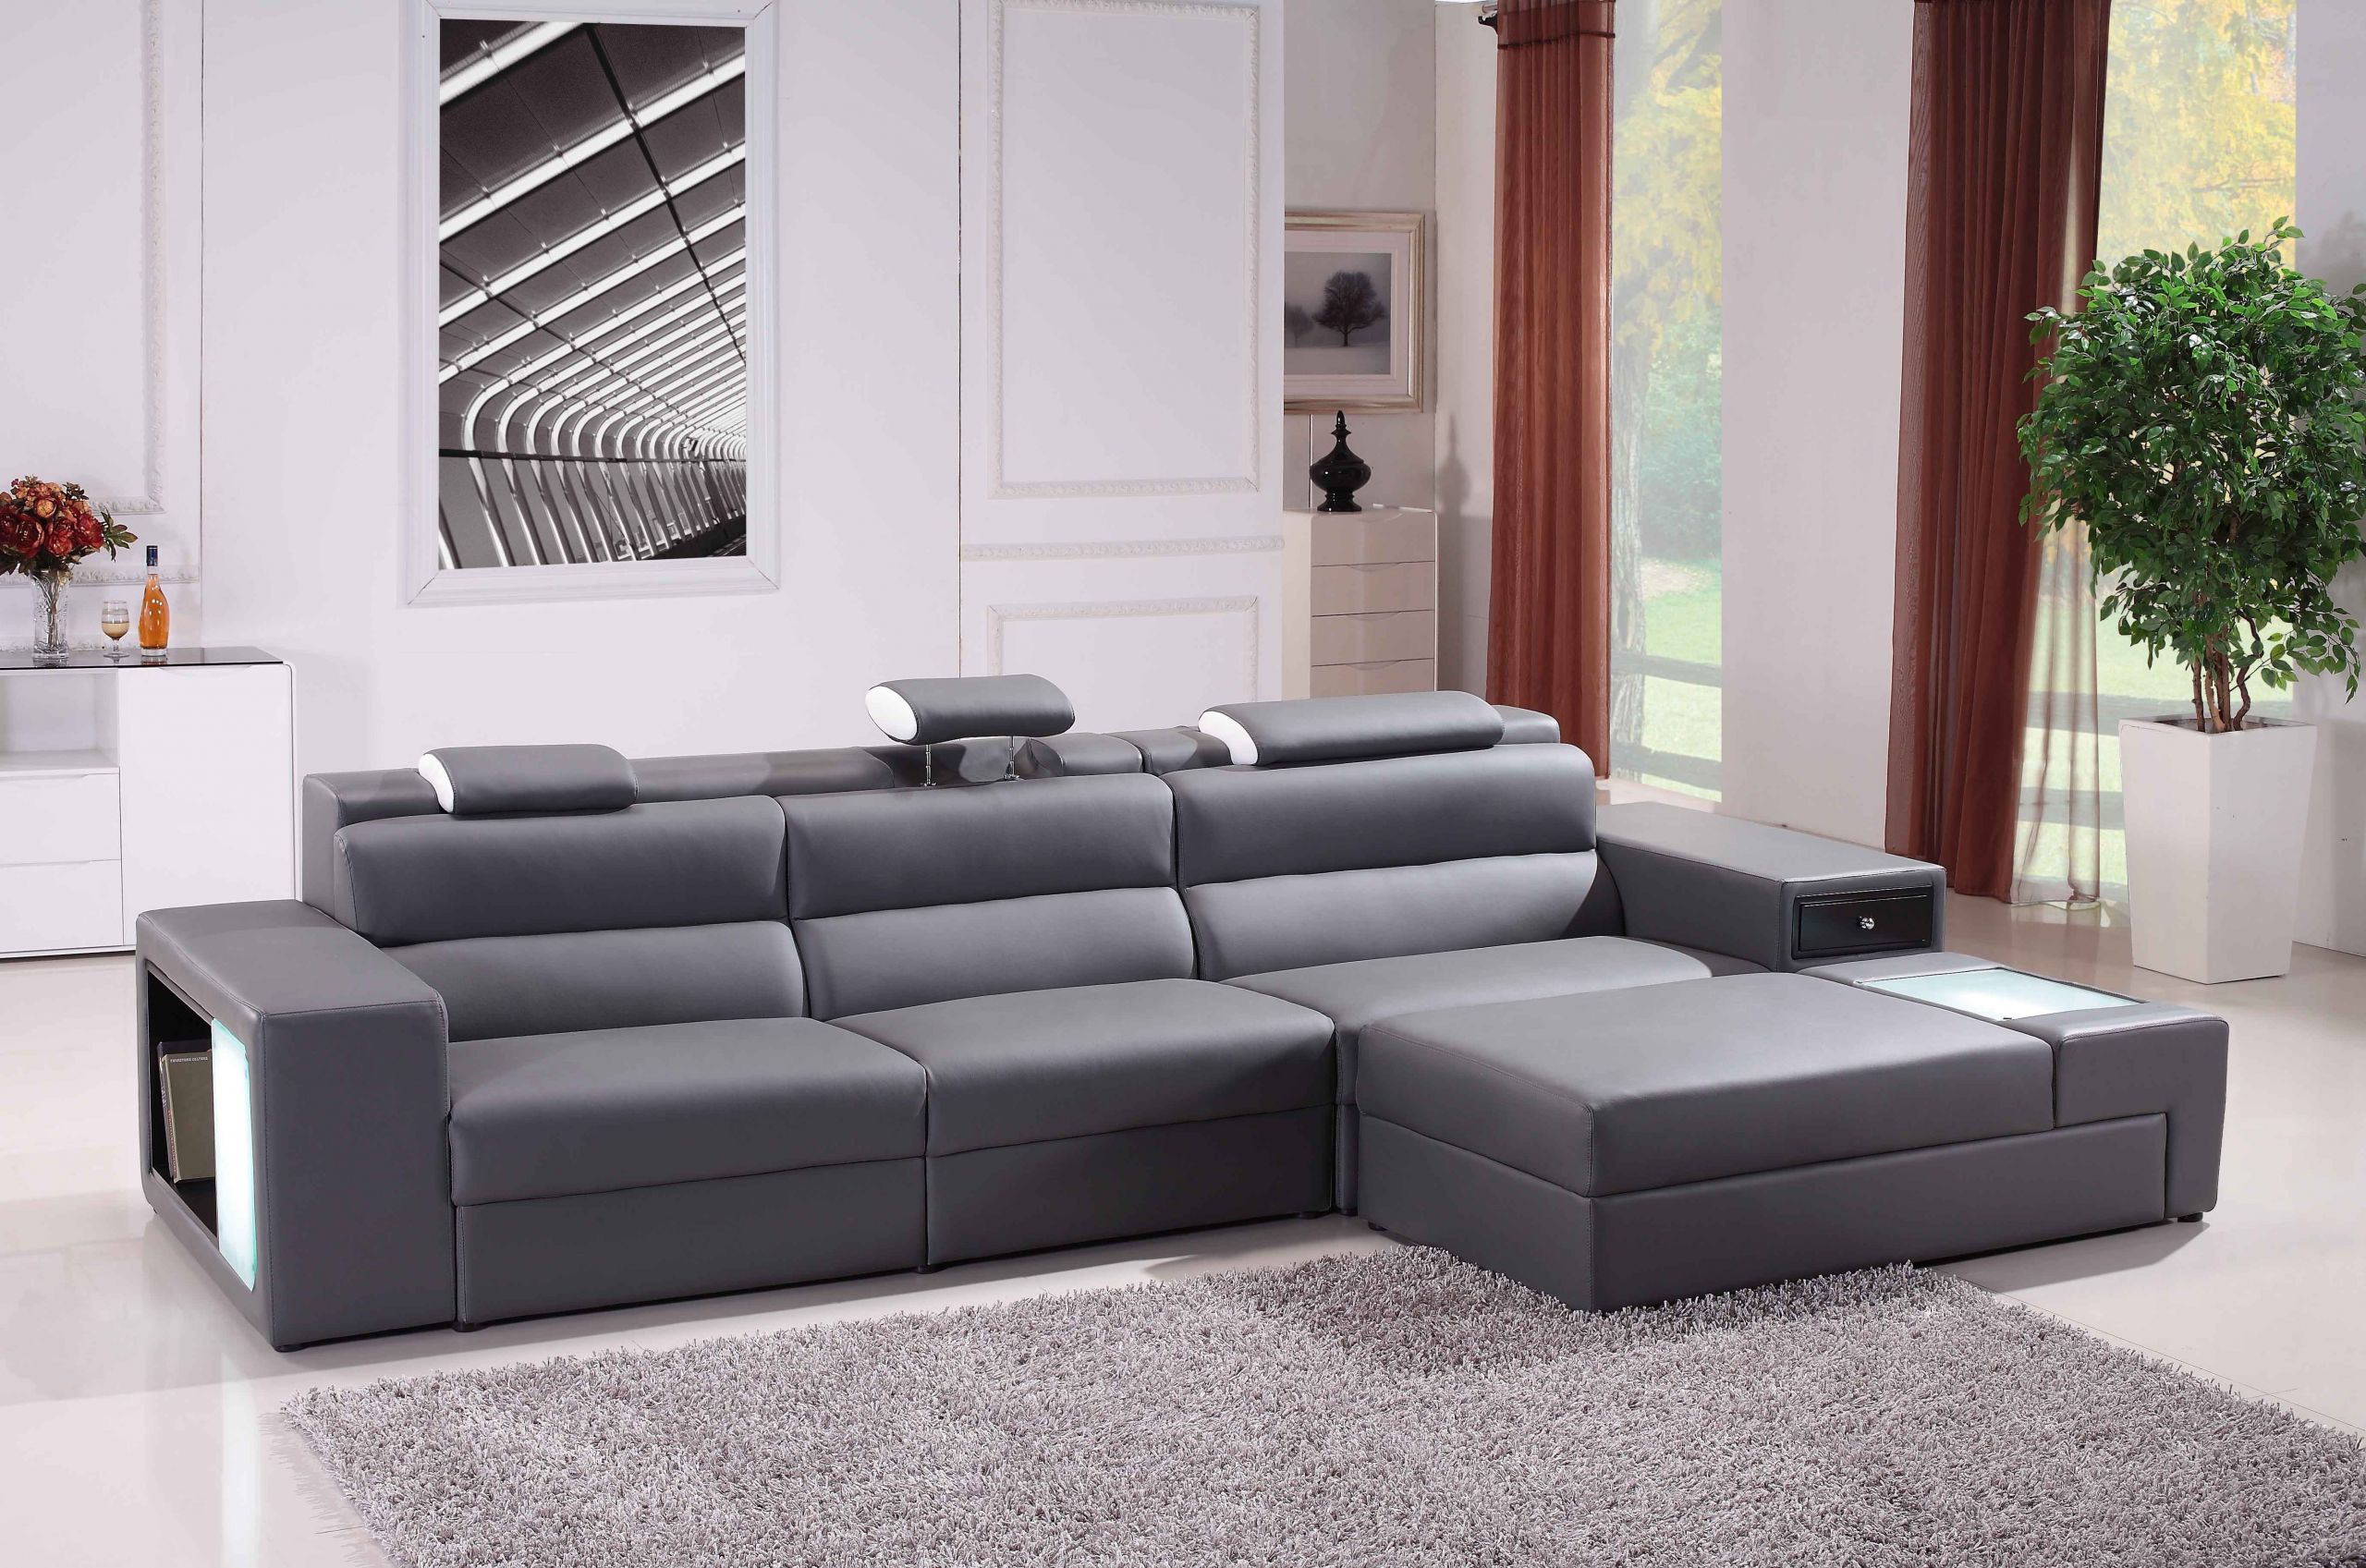 Modern Living Room Sectionals
 Polaris Mini Contemporary Grey Bonded Leather Sectional